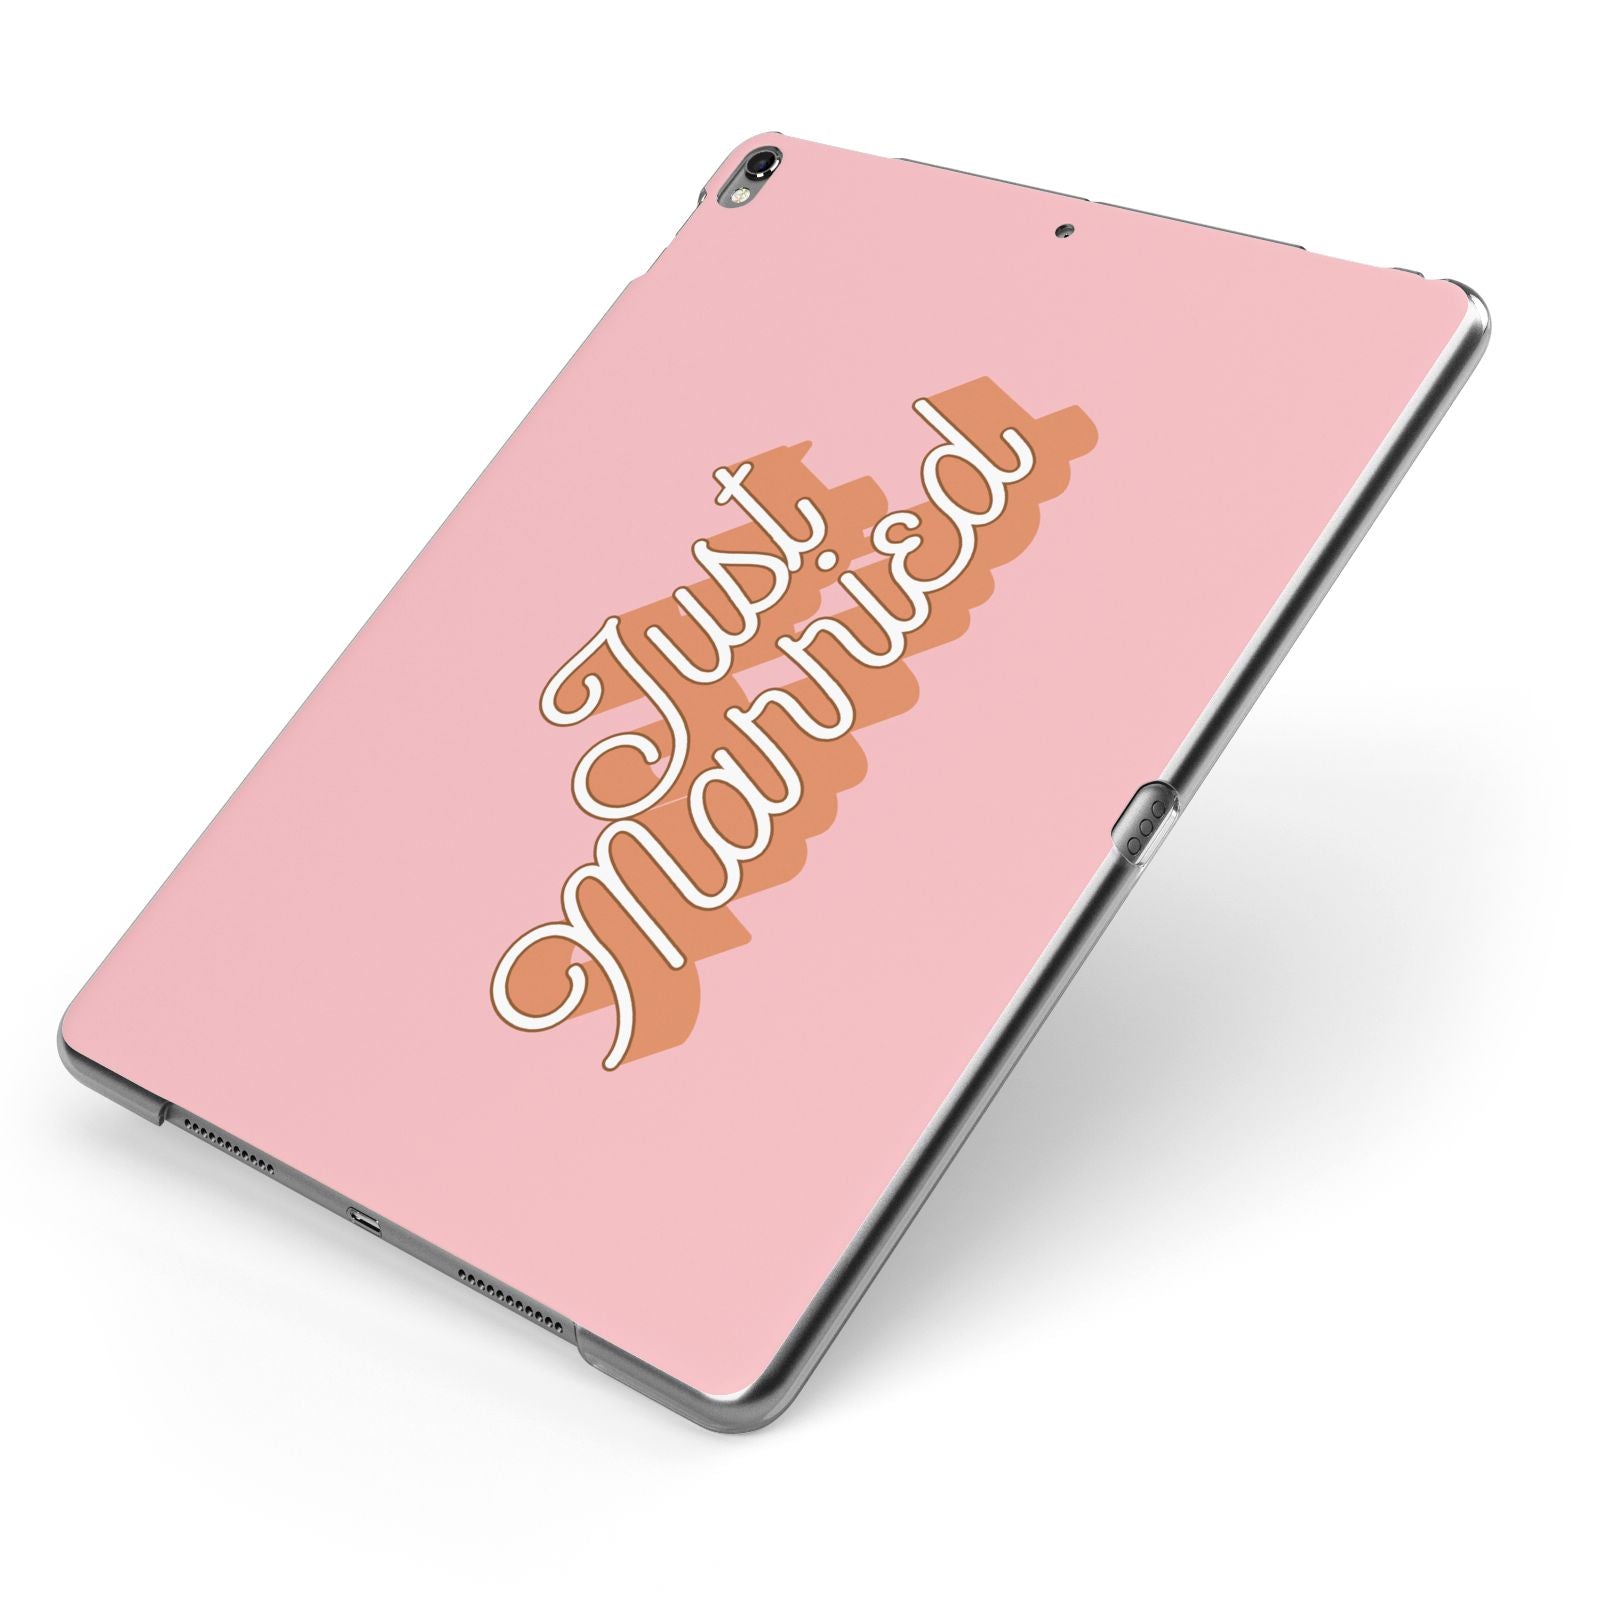 Just Married Pink Apple iPad Case on Grey iPad Side View